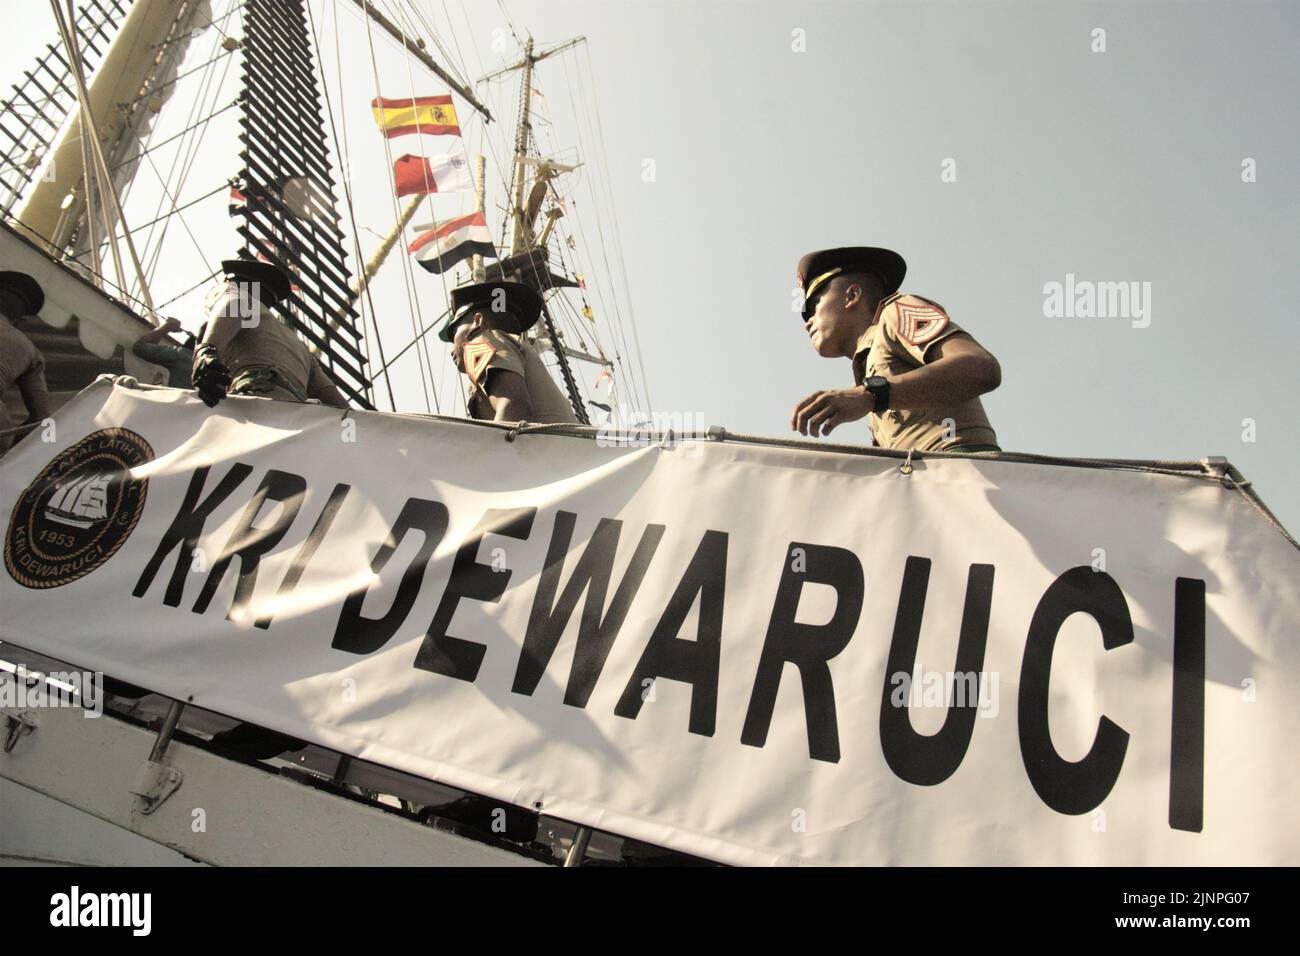 Indonesian navy cadets walking up the ladder of KRI Dewaruci (Dewa Ruci), an Indonesian tall ship, as the barquentine type schooner is opened for public visitors at Kolinlamil harbour (Navy harbour) in Tanjung Priok, North Jakarta, Jakarta, Indonesia. Stock Photo